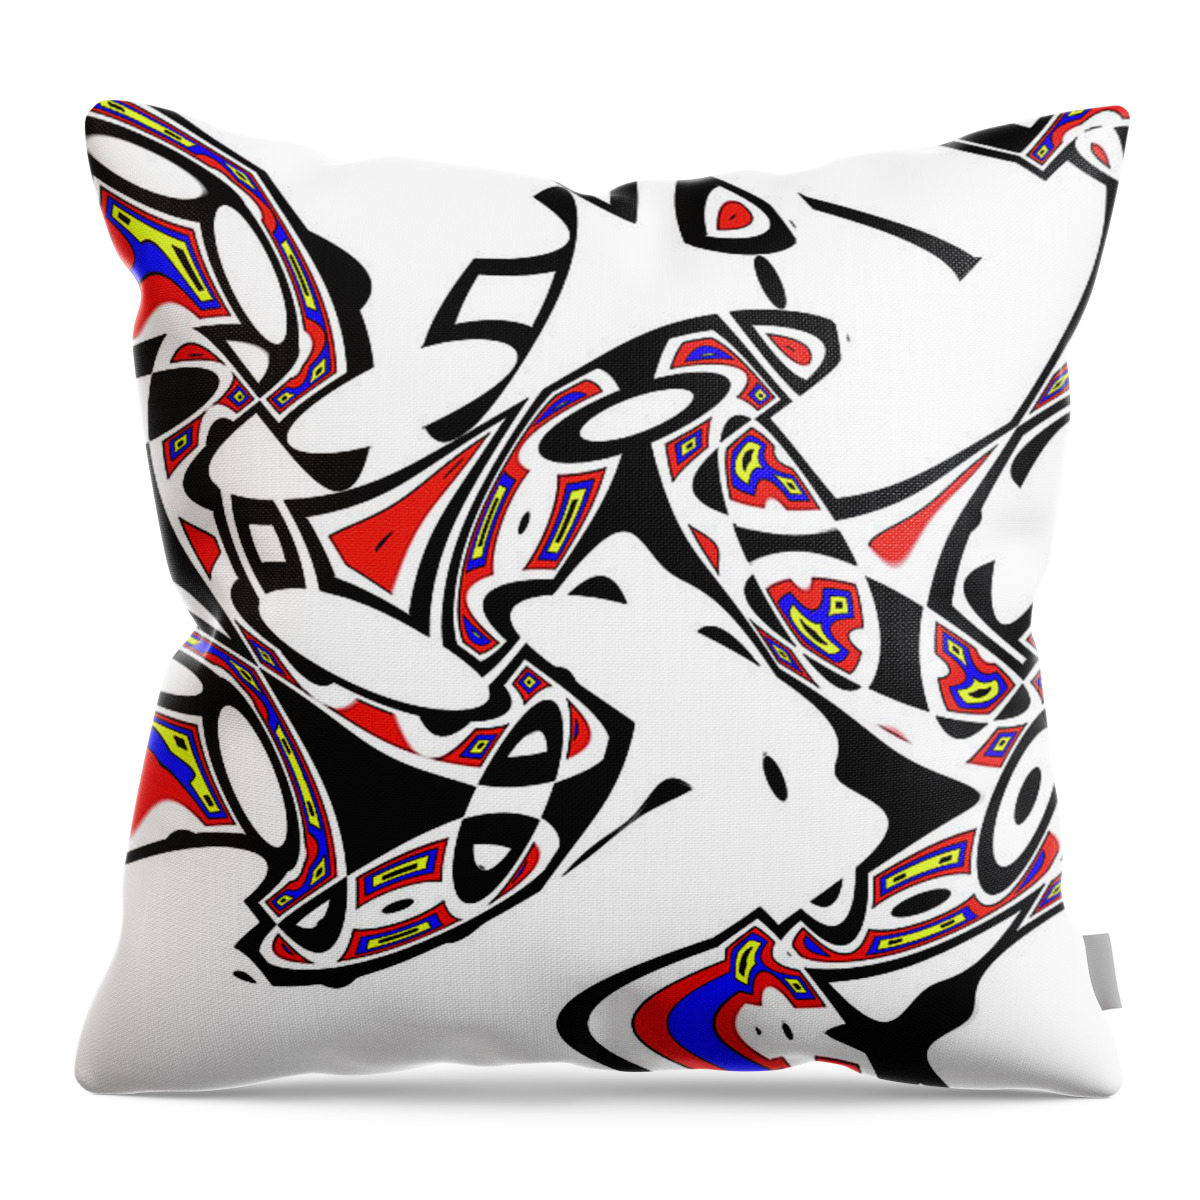 Native Dancers Throw Pillow featuring the digital art Native Dancers by Tom Janca